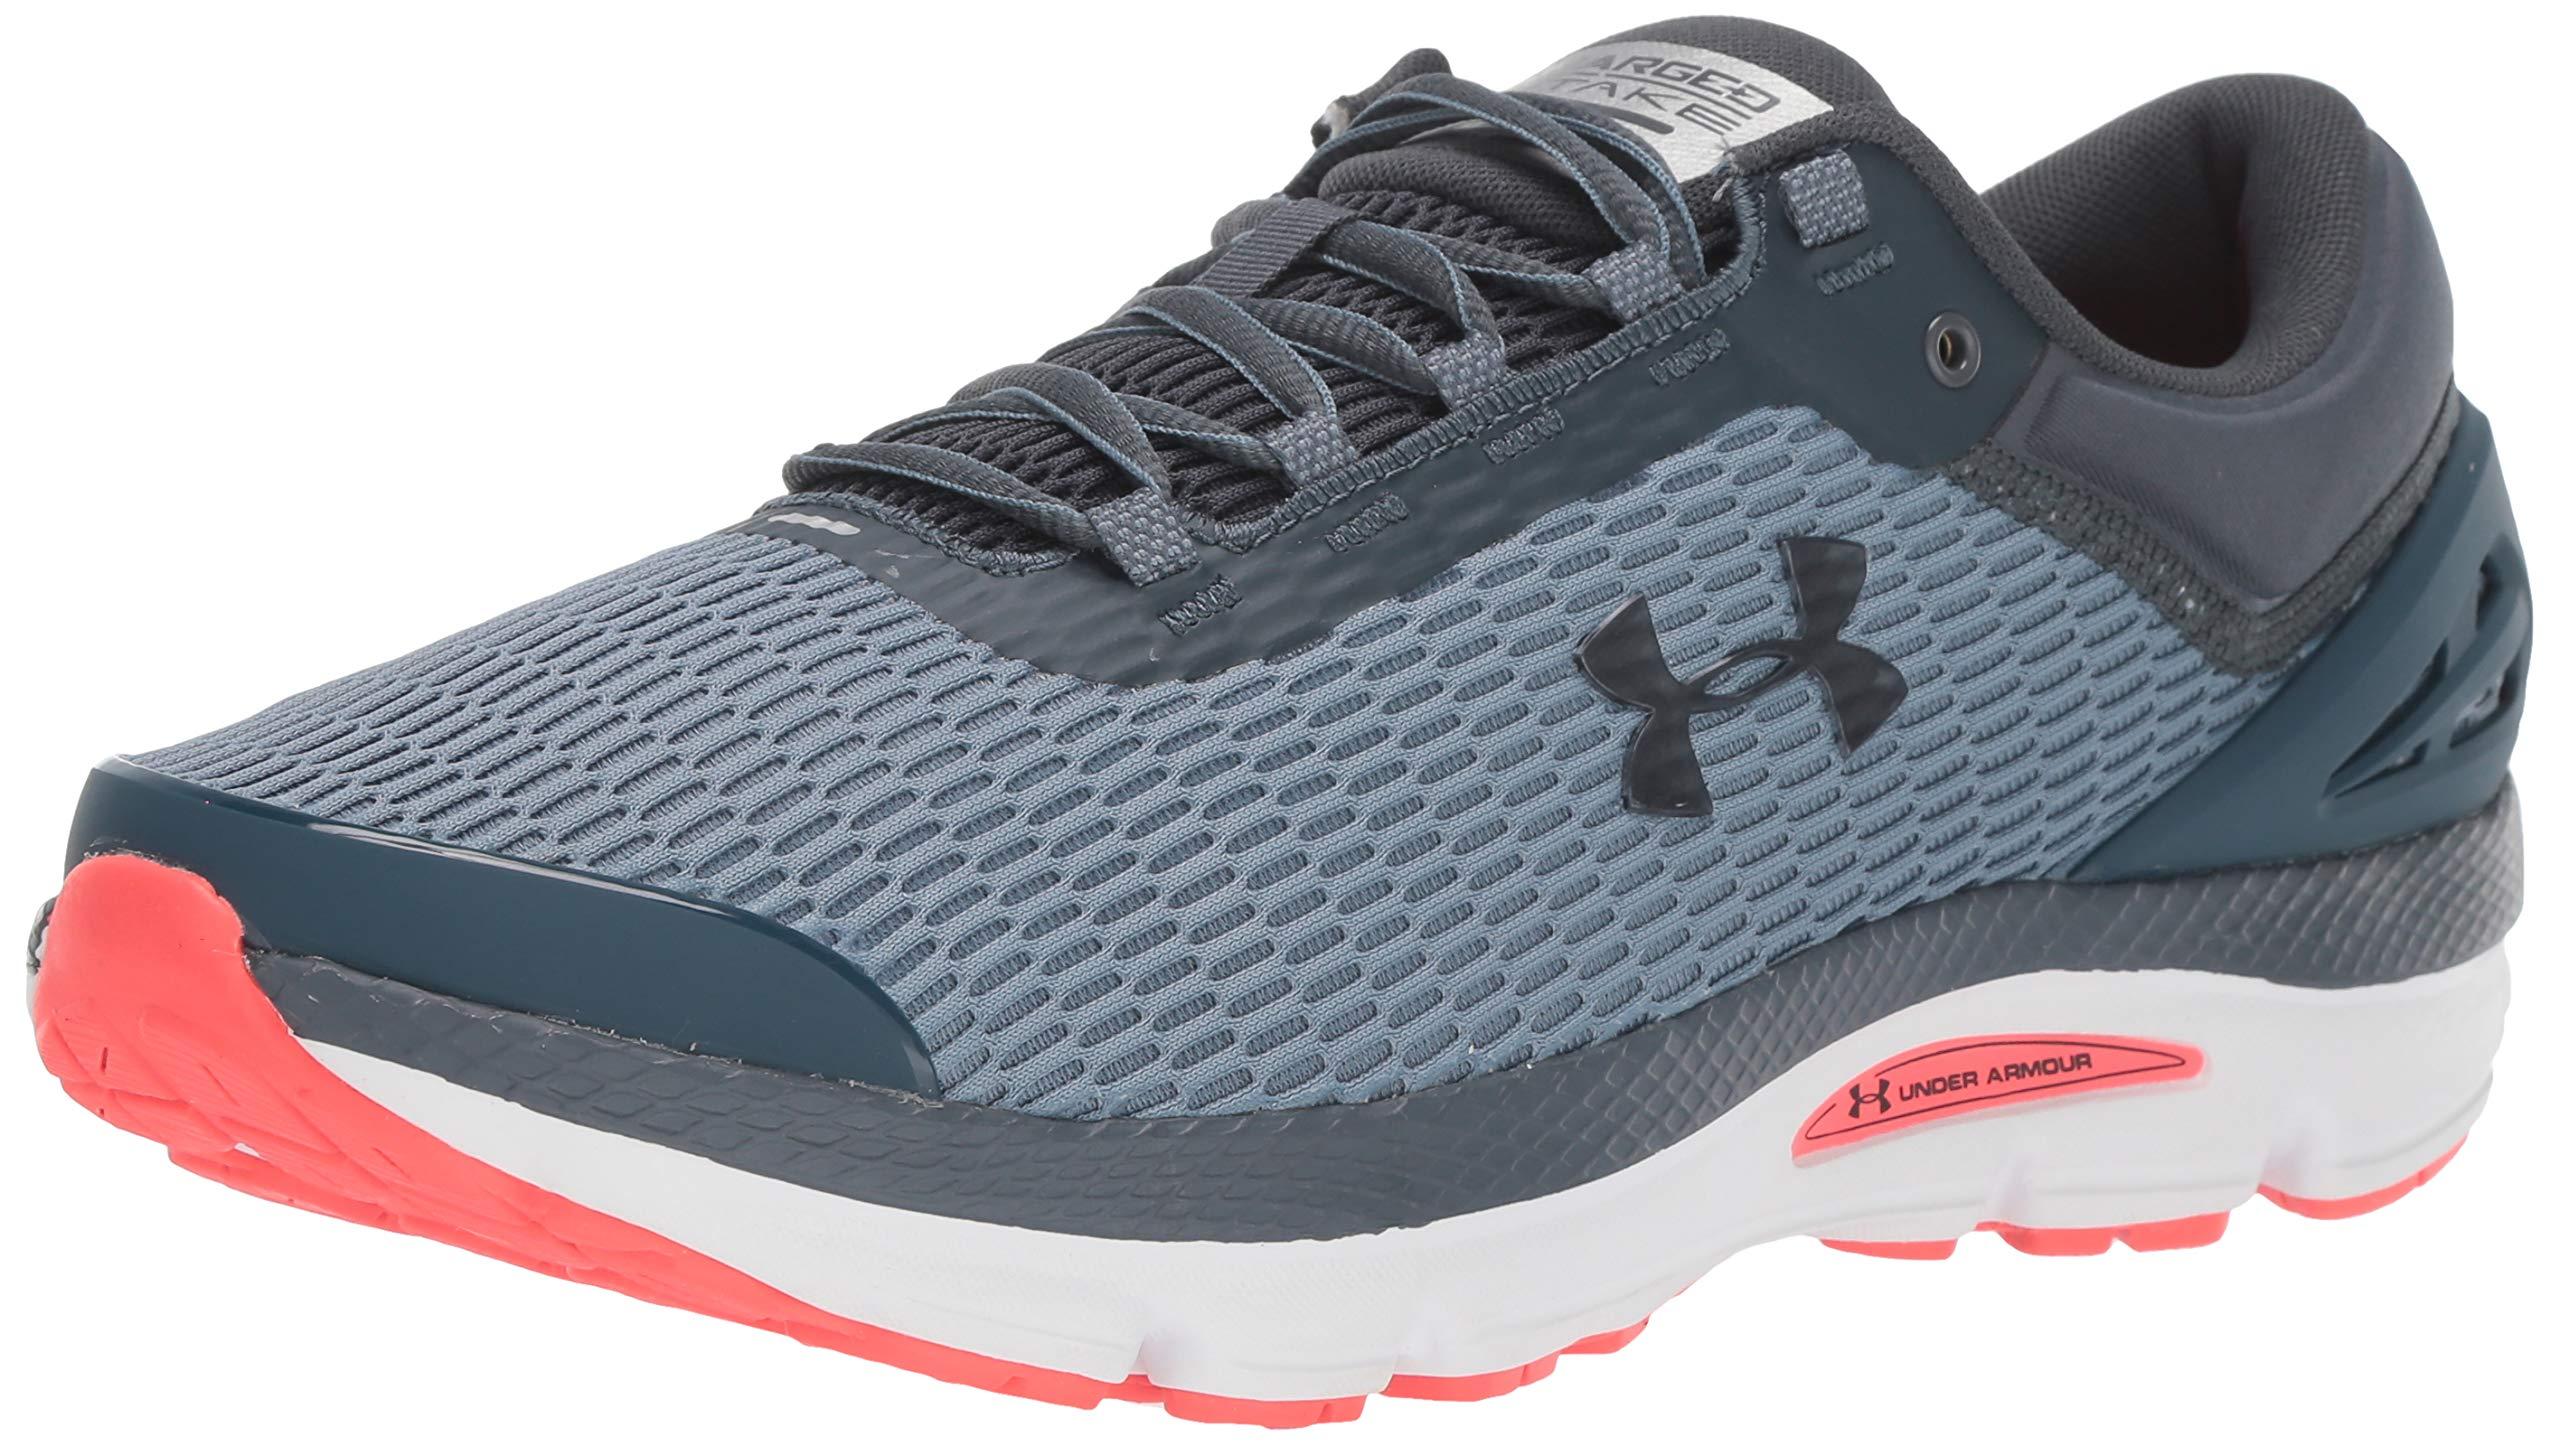 Under Armour Mens Charged Intake 3 Running Shoe 